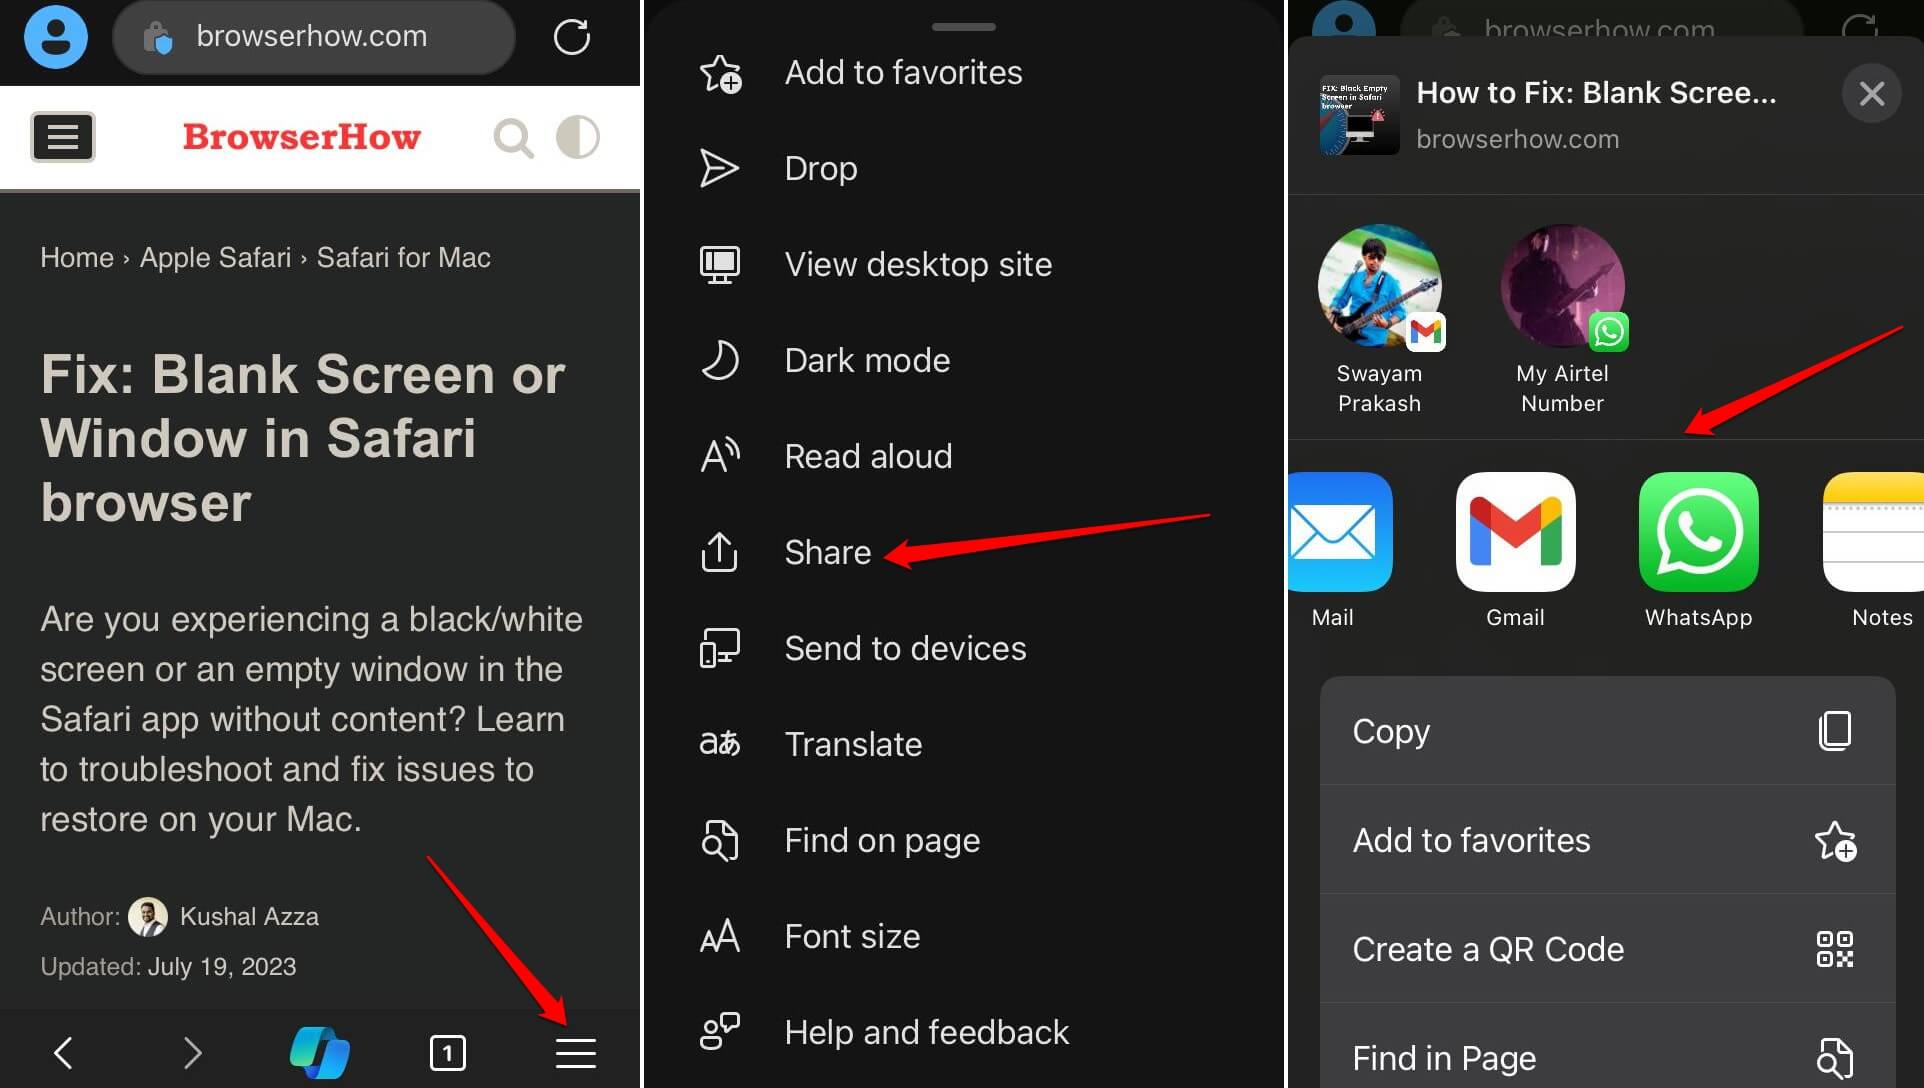 how to share link externally in Edge browser iOS